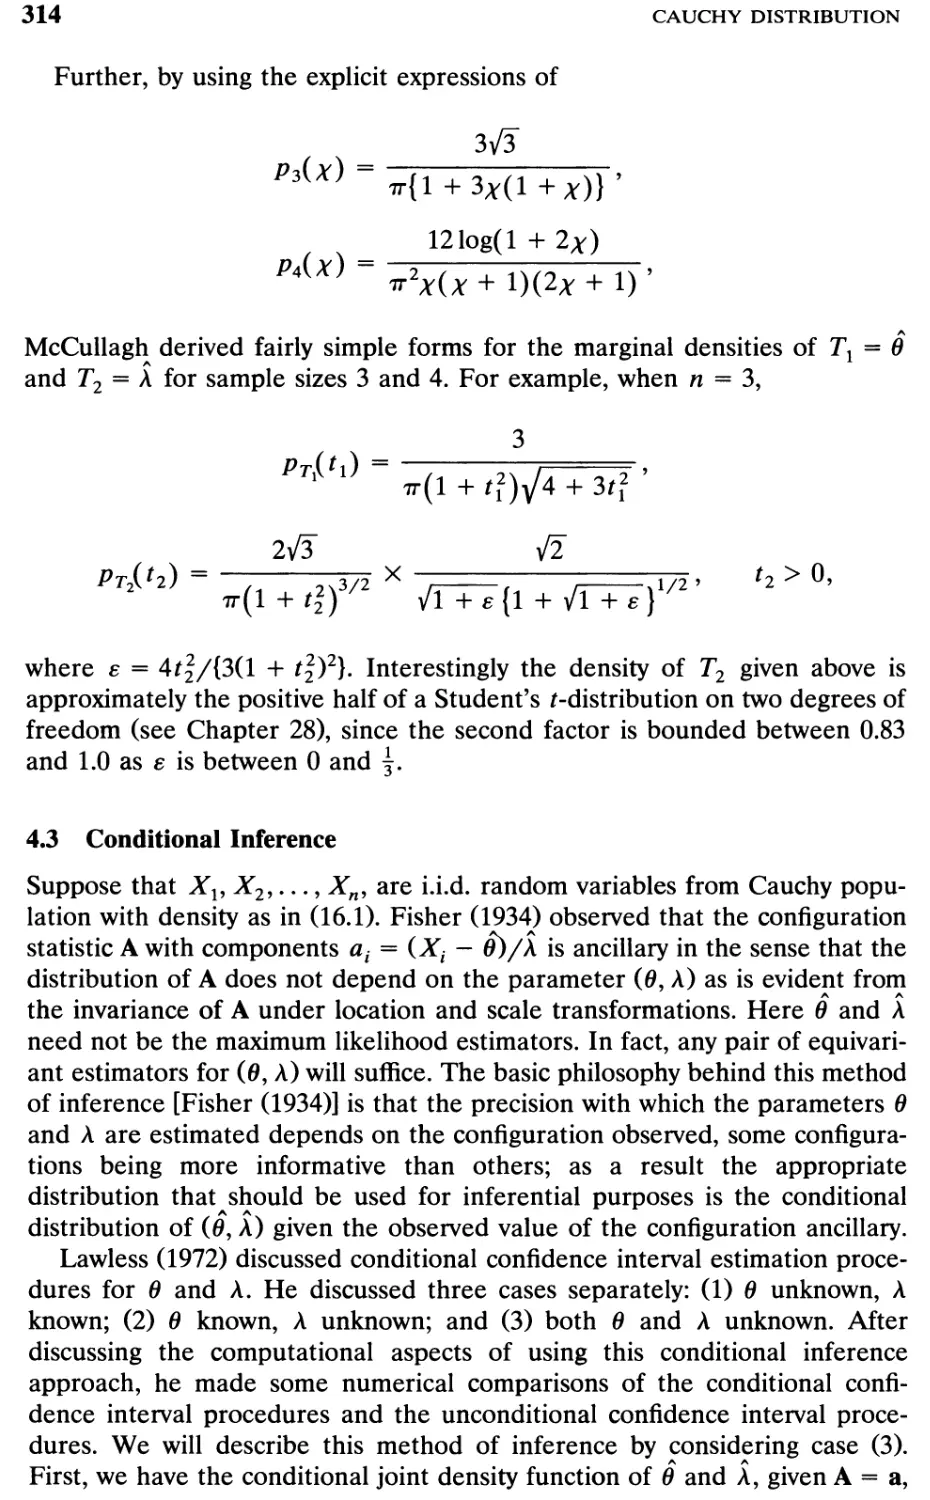 4.3 Conditional Inference, 314